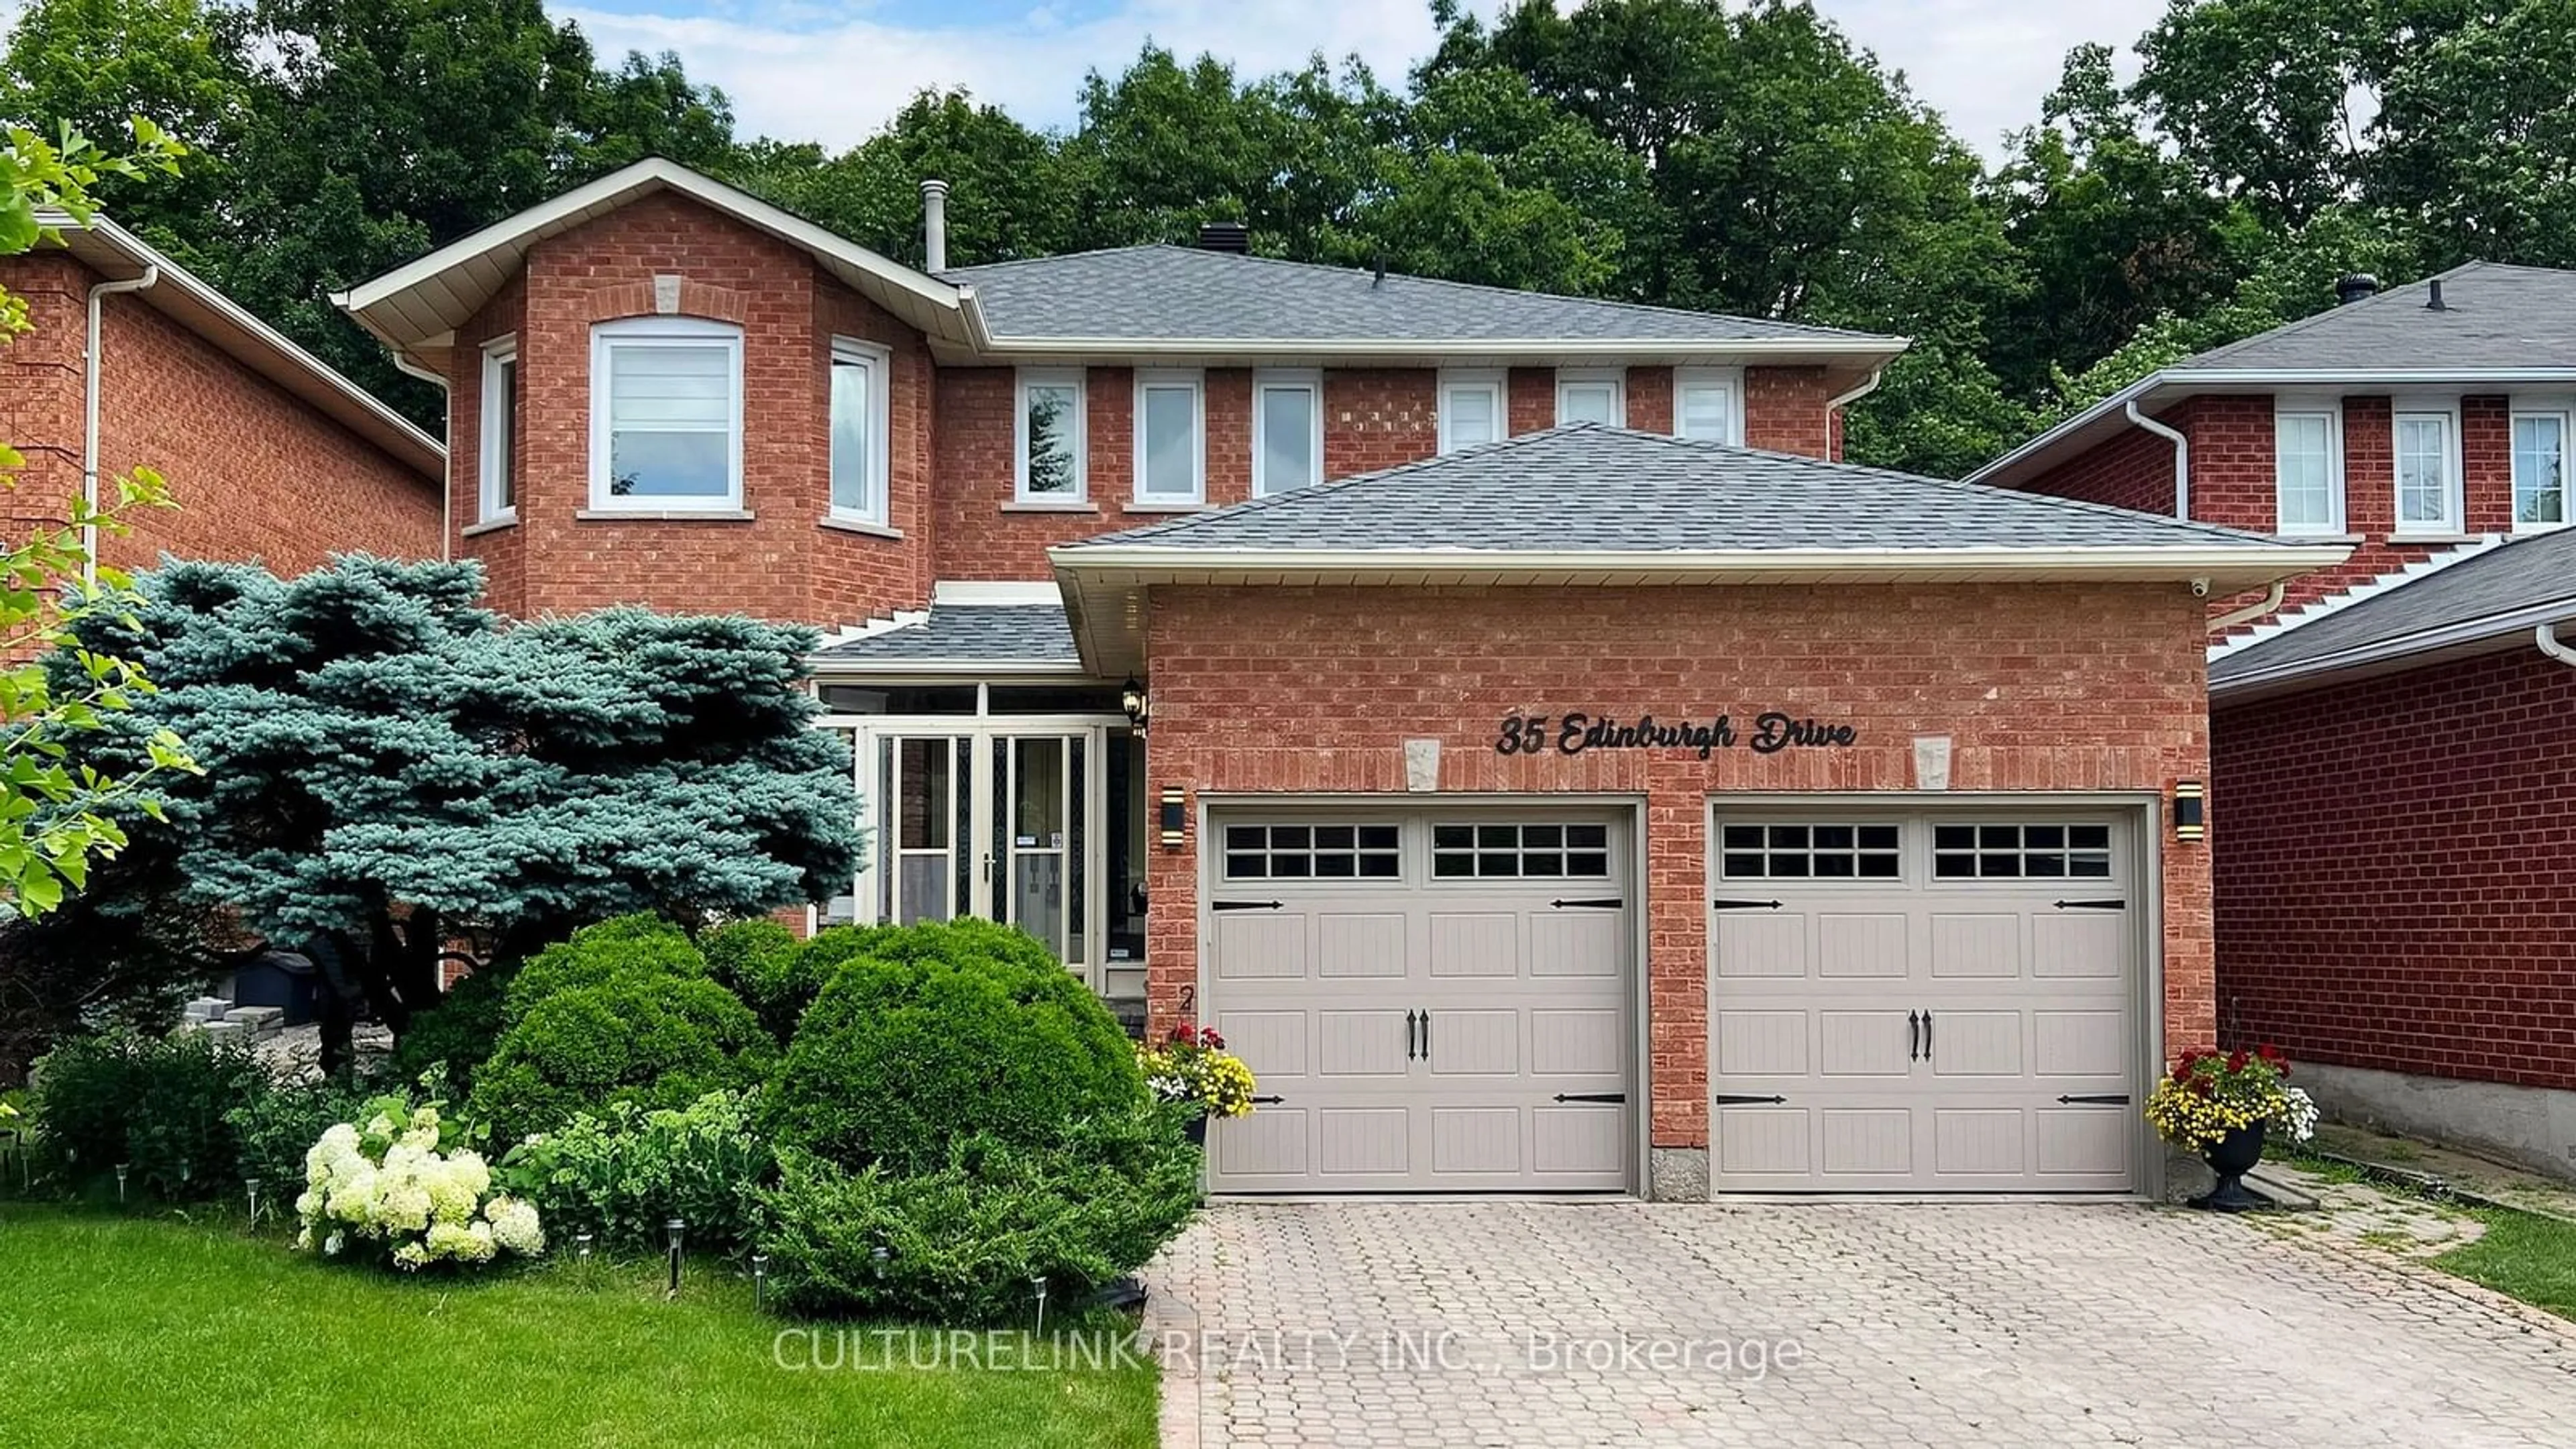 Home with brick exterior material for 35 Edinburgh Dr, Richmond Hill Ontario L4B 1Y8